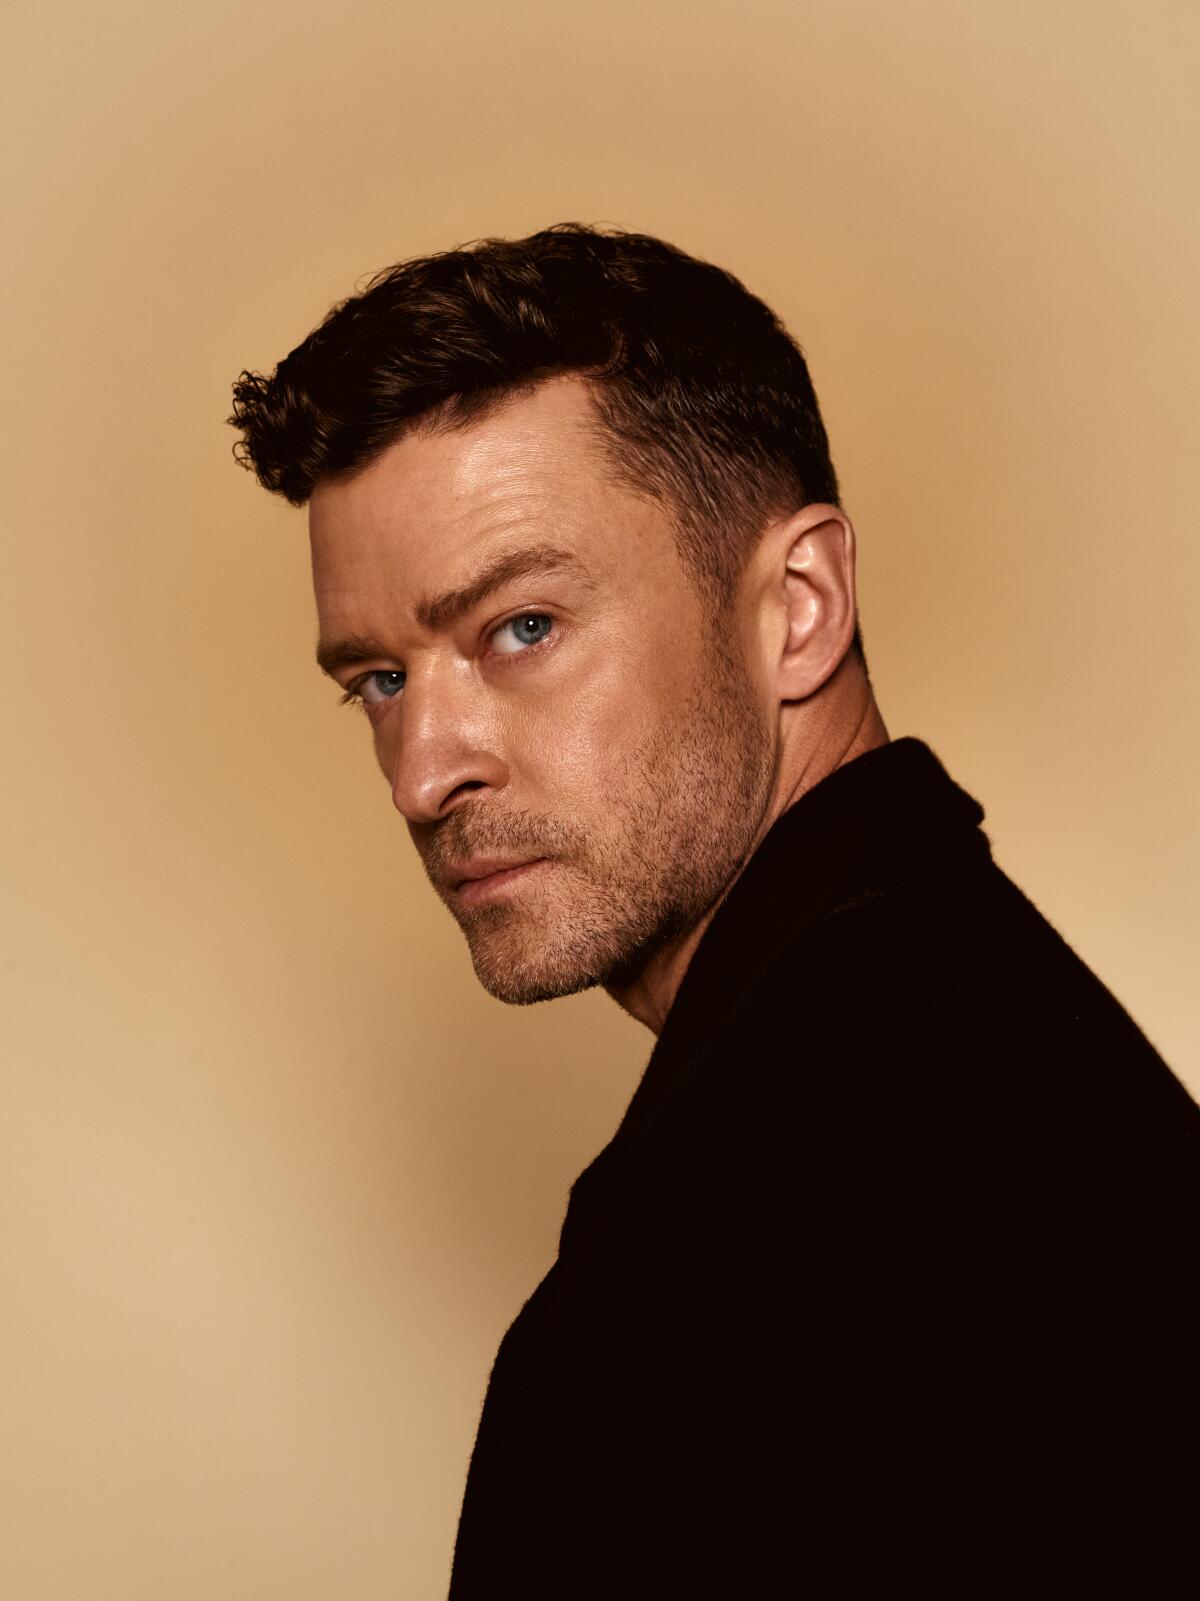 Justin Timberlake's new album is "Everything I Thought It Was."